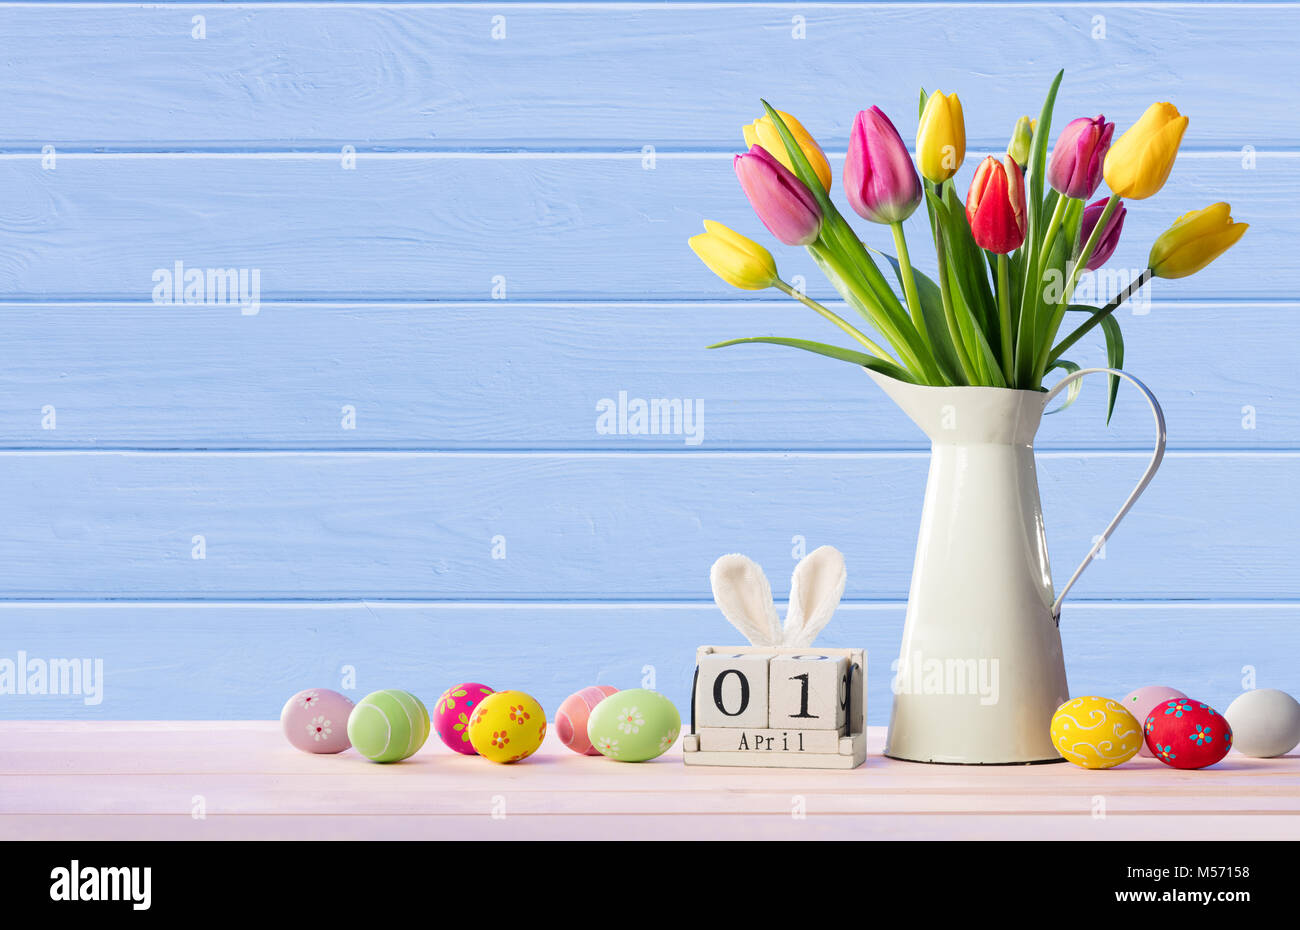 Easter - Calendar Date With Decorated Eggs And Tulips - Pastel Colors Stock Photo